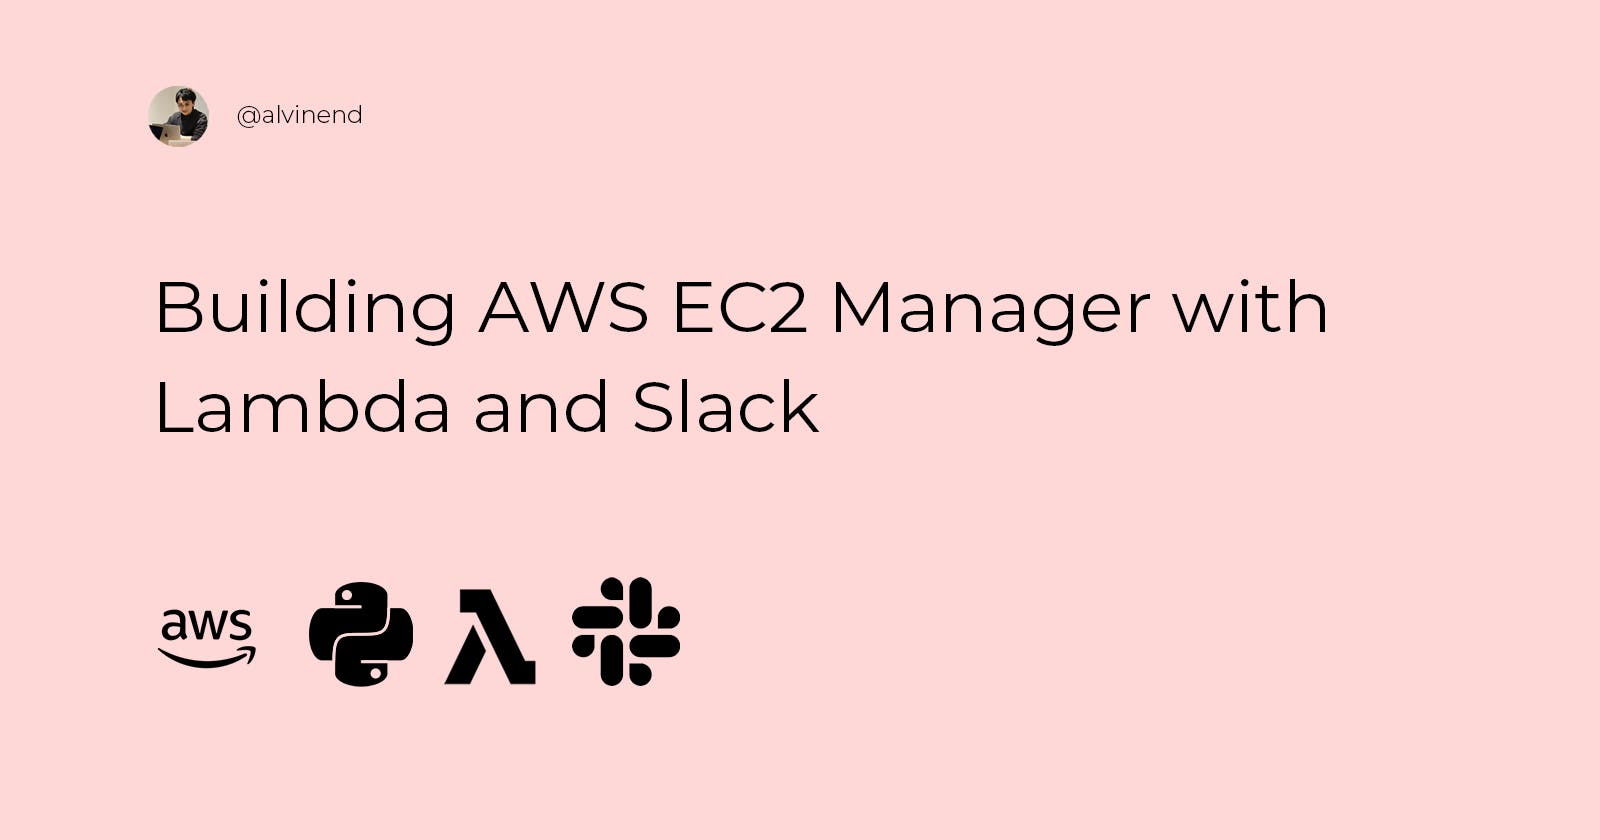 Building AWS EC2 Manager with Lambda and Slack